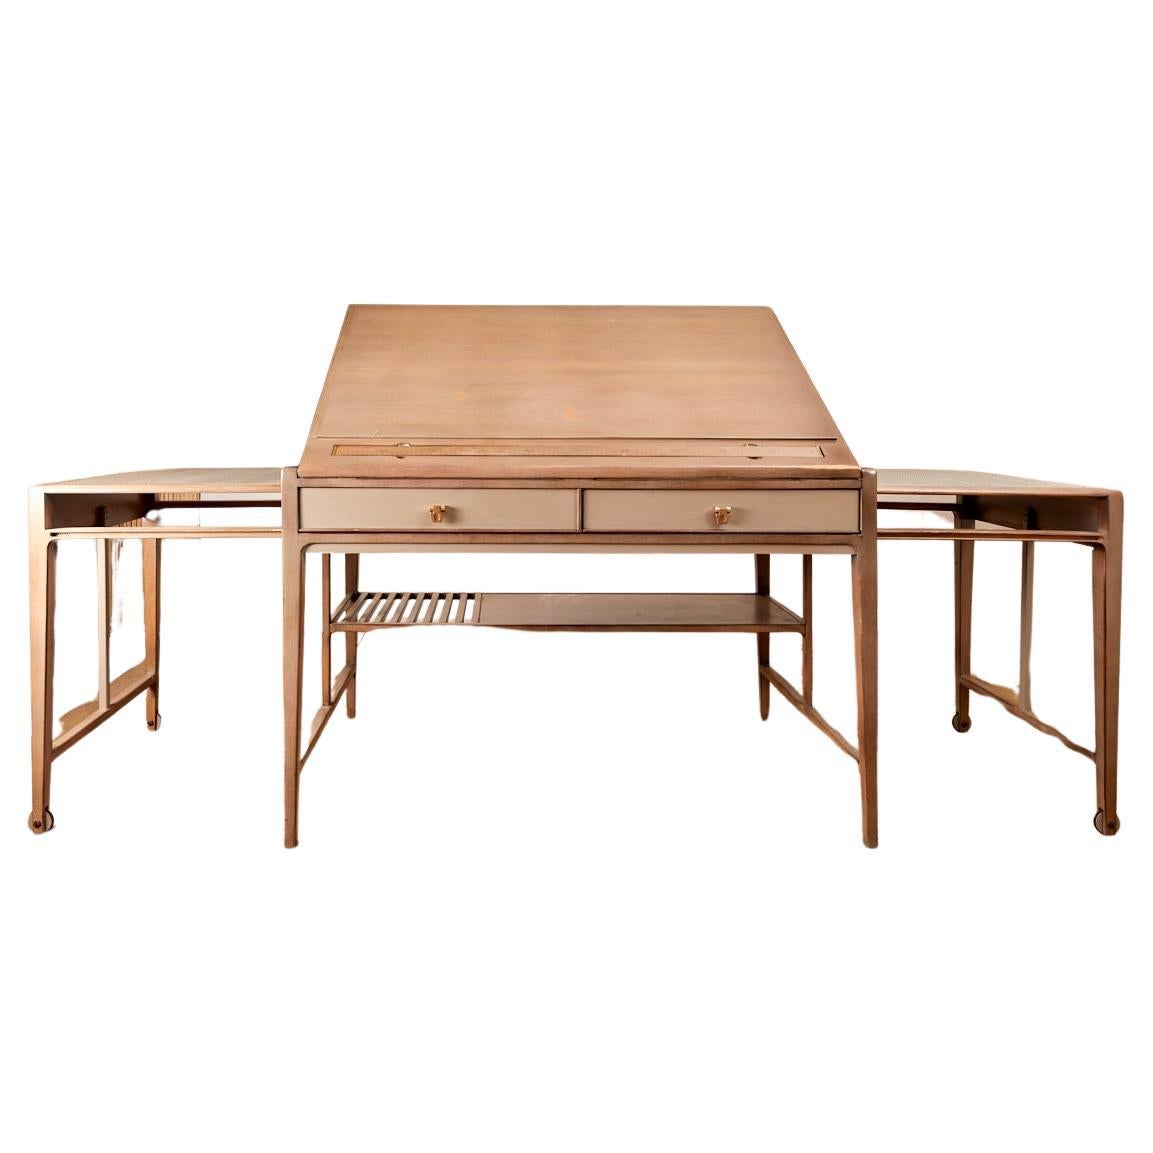 Architect's desk, wood and metal, circa 1970, France. For Sale